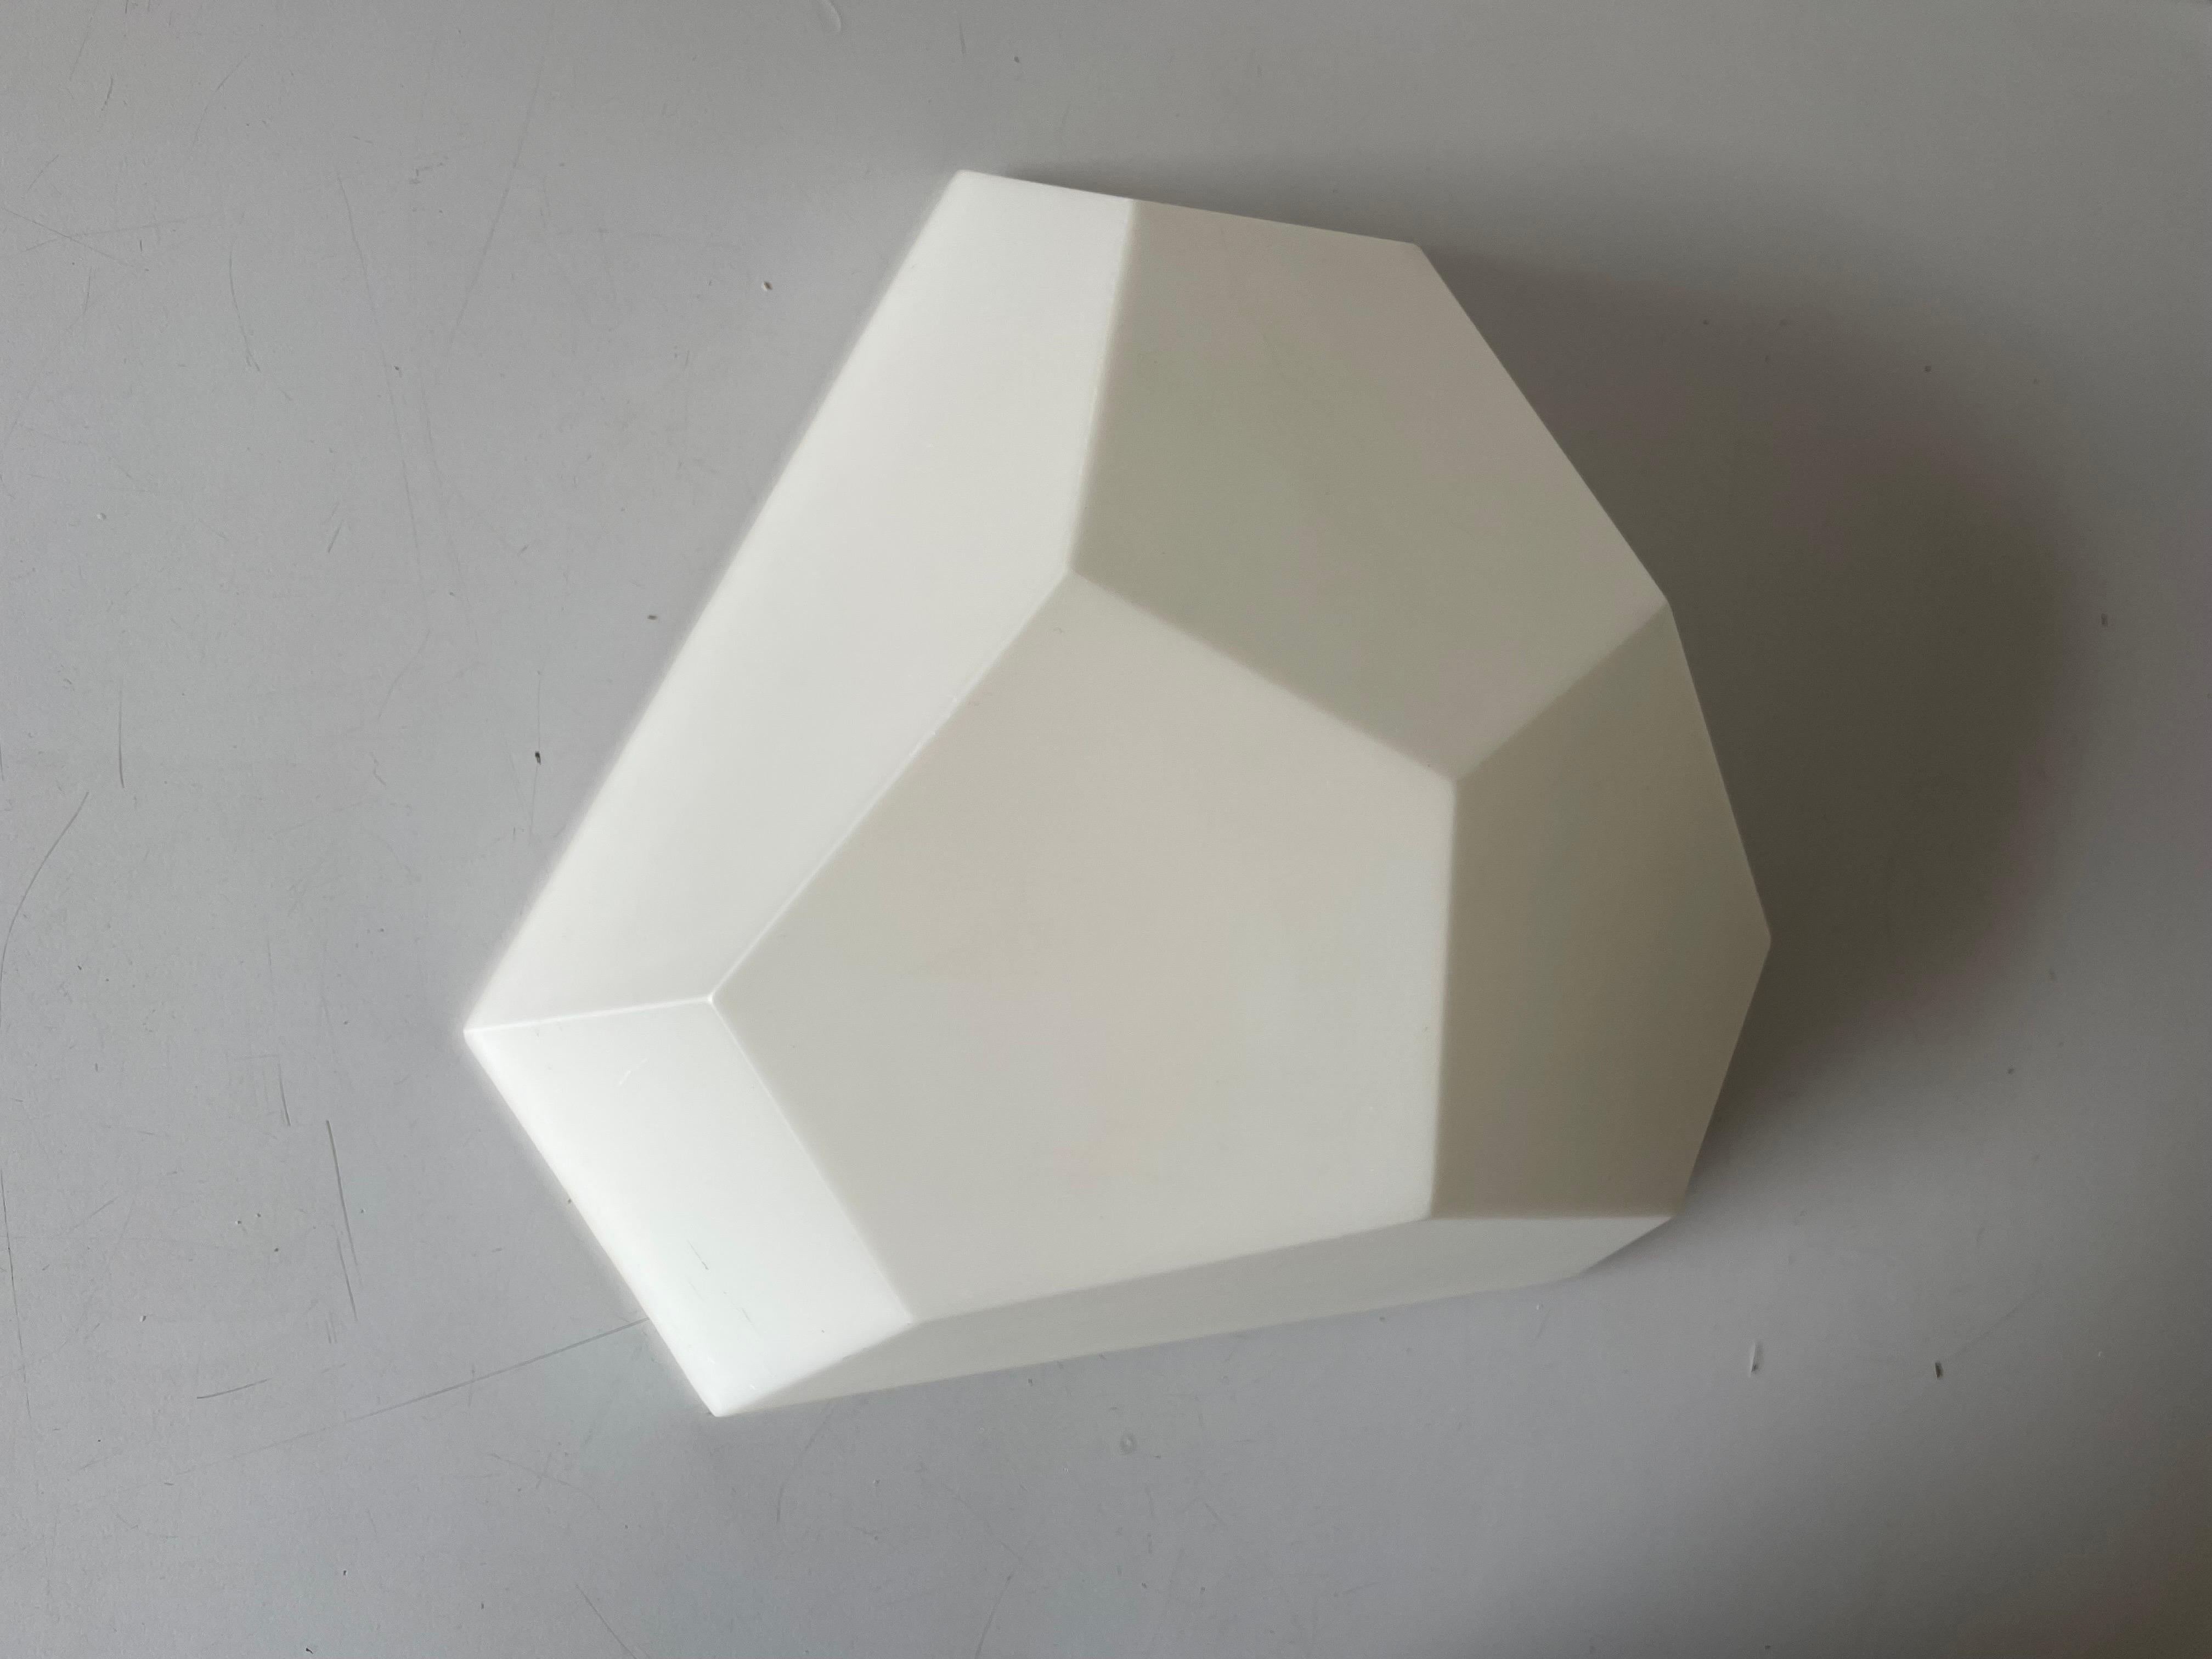 Exceptional hard plastic wall or ceiling lamp by Rudolf Dörfler, 1960s, Switzerland

Sculptural minimal design very elegant rare ceiling lamp flush mount.

It is very ideal and suitable for all living areas.

Lamp is in good condition. No